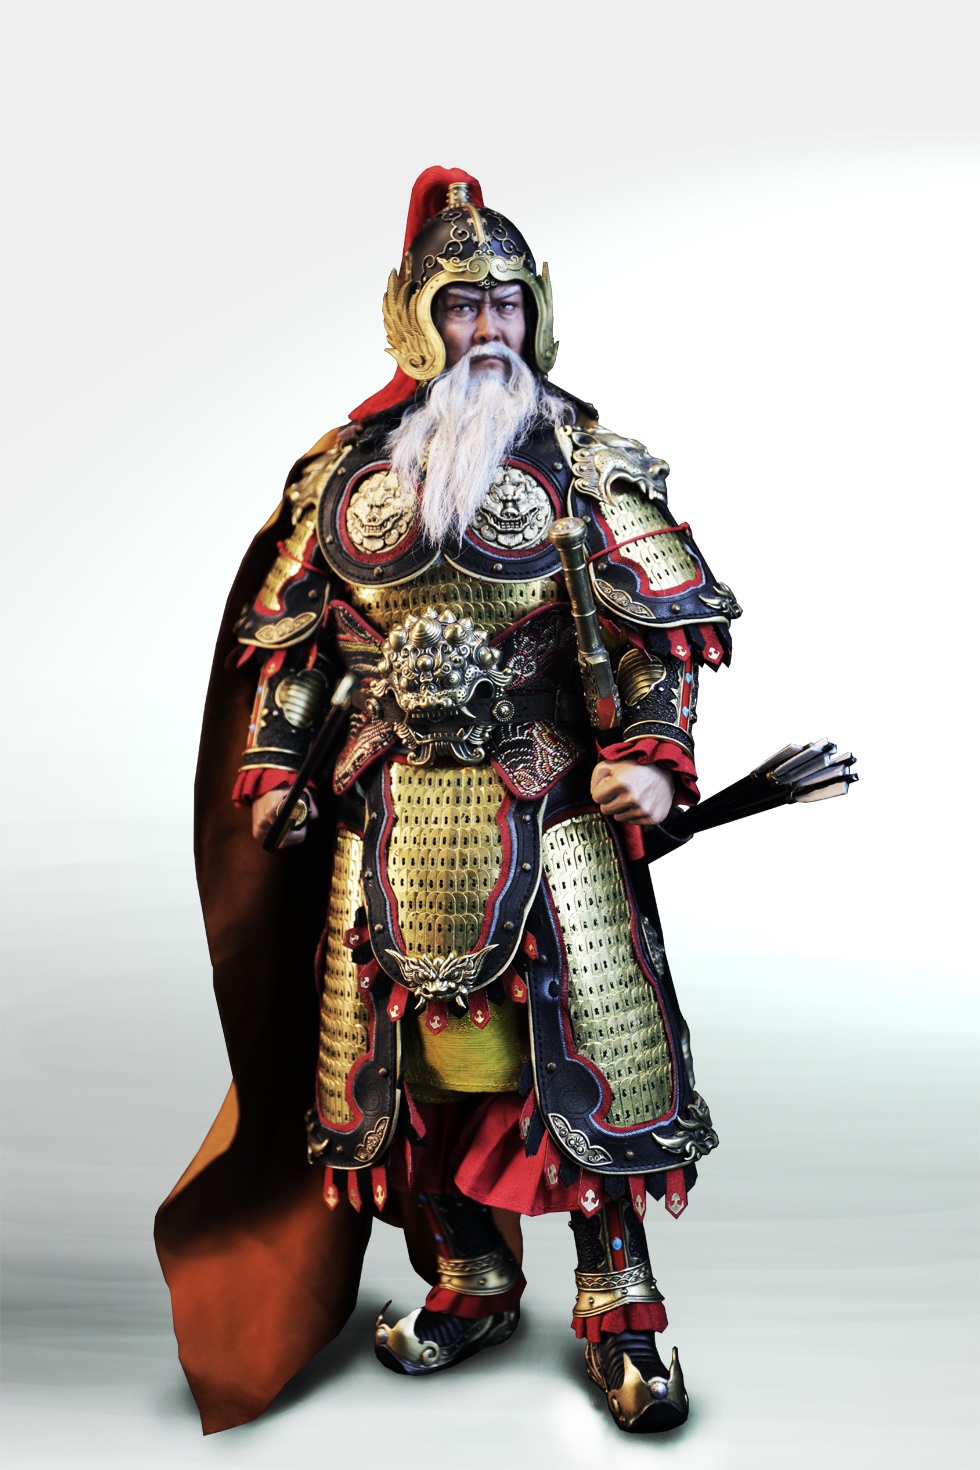 RearGeneral - NEW PRODUCT: 303Toys:1/6 Three Kingdoms Series - Rear General Huang Zhong - Hansheng Pure Copper Standard Edition/Deluxe Edition/War Horse#MP021/MP022 16394911